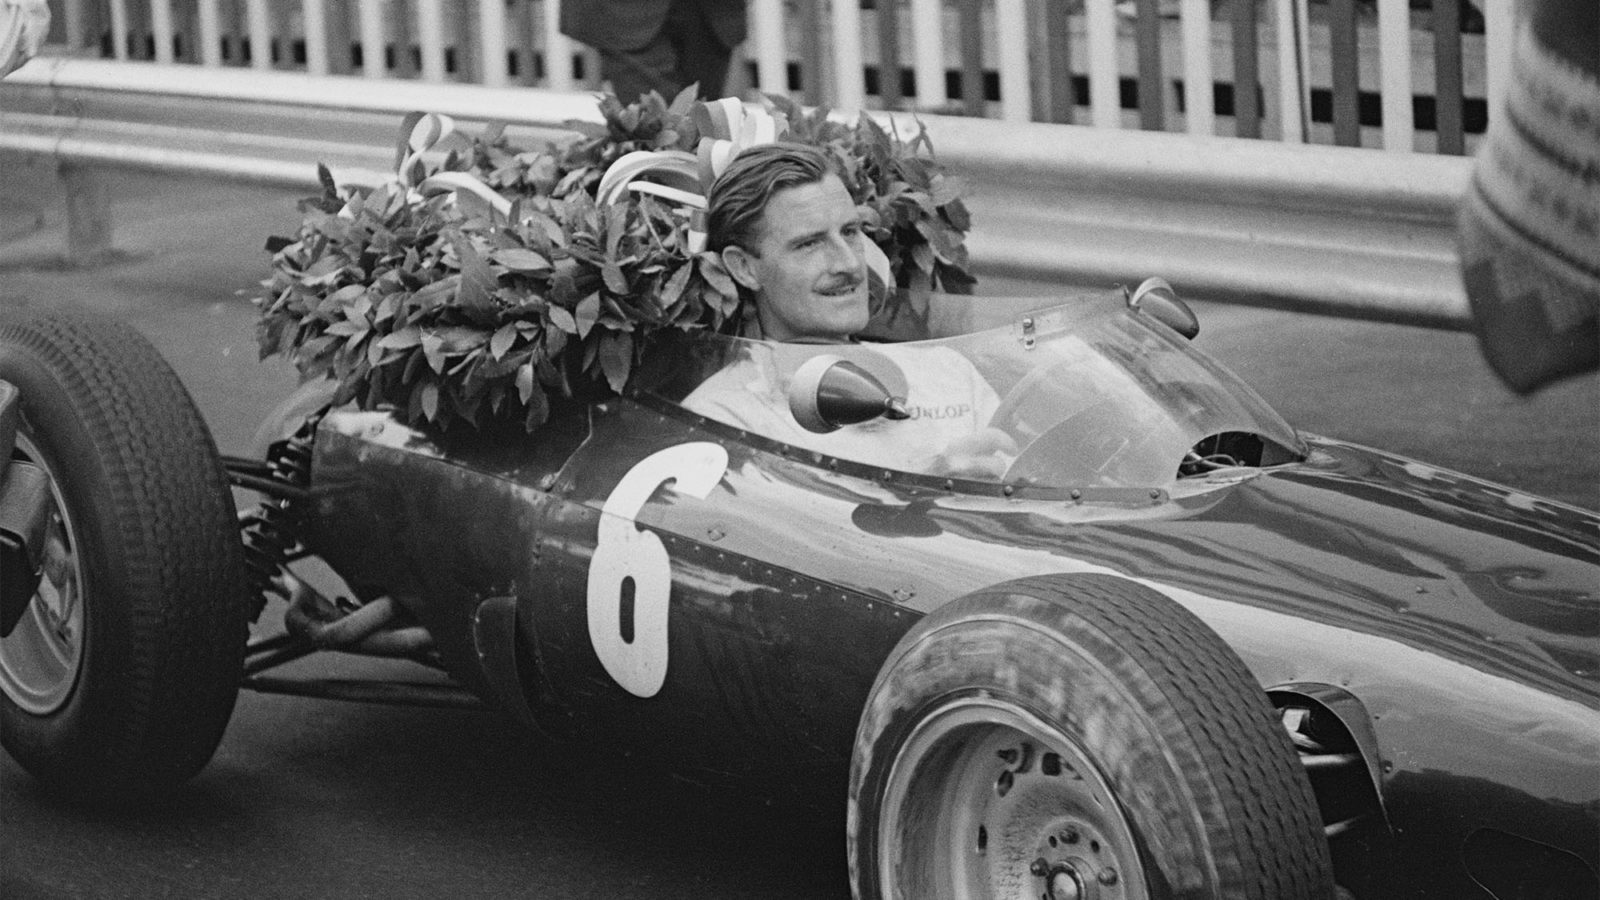 English racing driver Graham Hill (1929-1975) pictured in the driver's seat of the #6 Owen Racing Organisation BRM P57 BRM P56 1.5 V8 racing car after finishing in first place to win the 1963 Monaco Grand Prix in Monte Carlo on 26th May 1963. (Photo by Express/Hulton Archive/Getty Images)